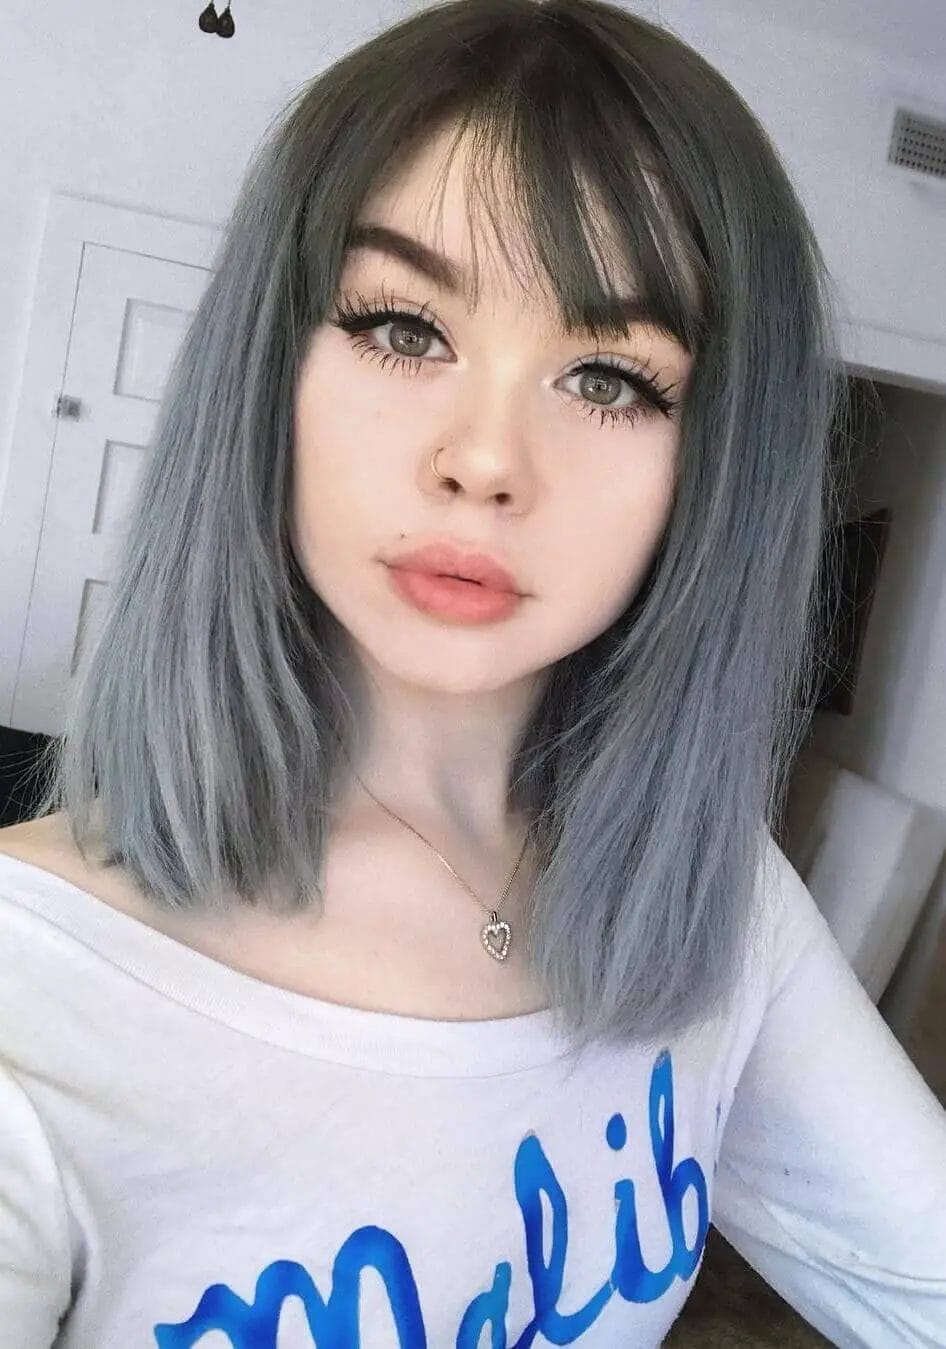 Chic bob with slate blue and gray highlights, straight-cut bangs, and sleek layered style for a fresh and modern classic-edgy look.